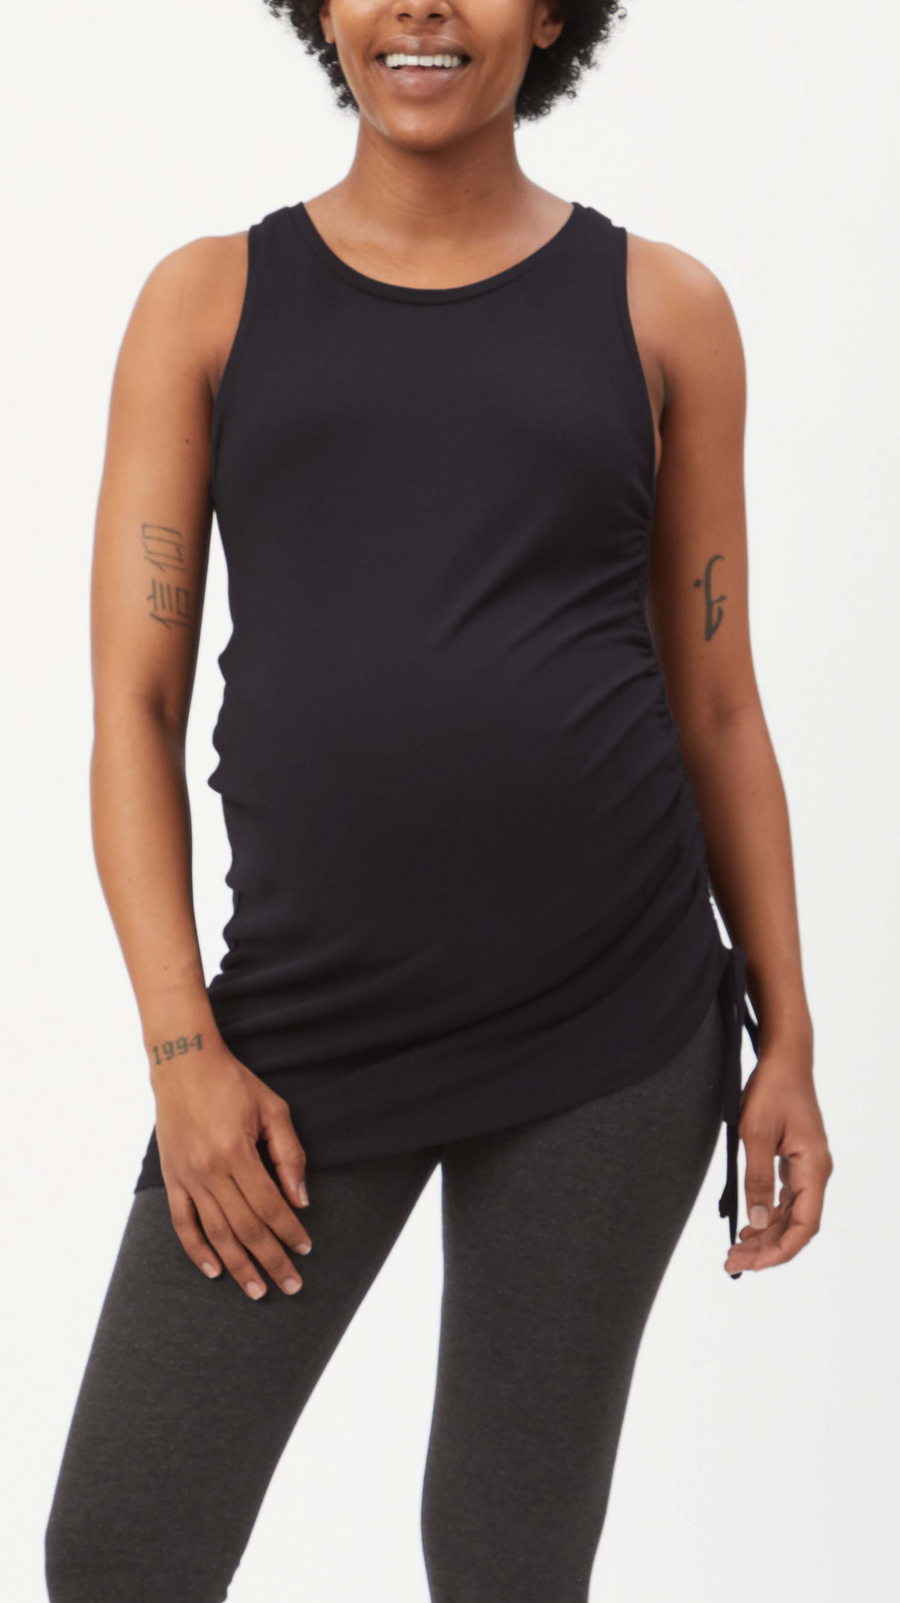 Stowaway Collection Drawstring Maternity Top in Black - side view